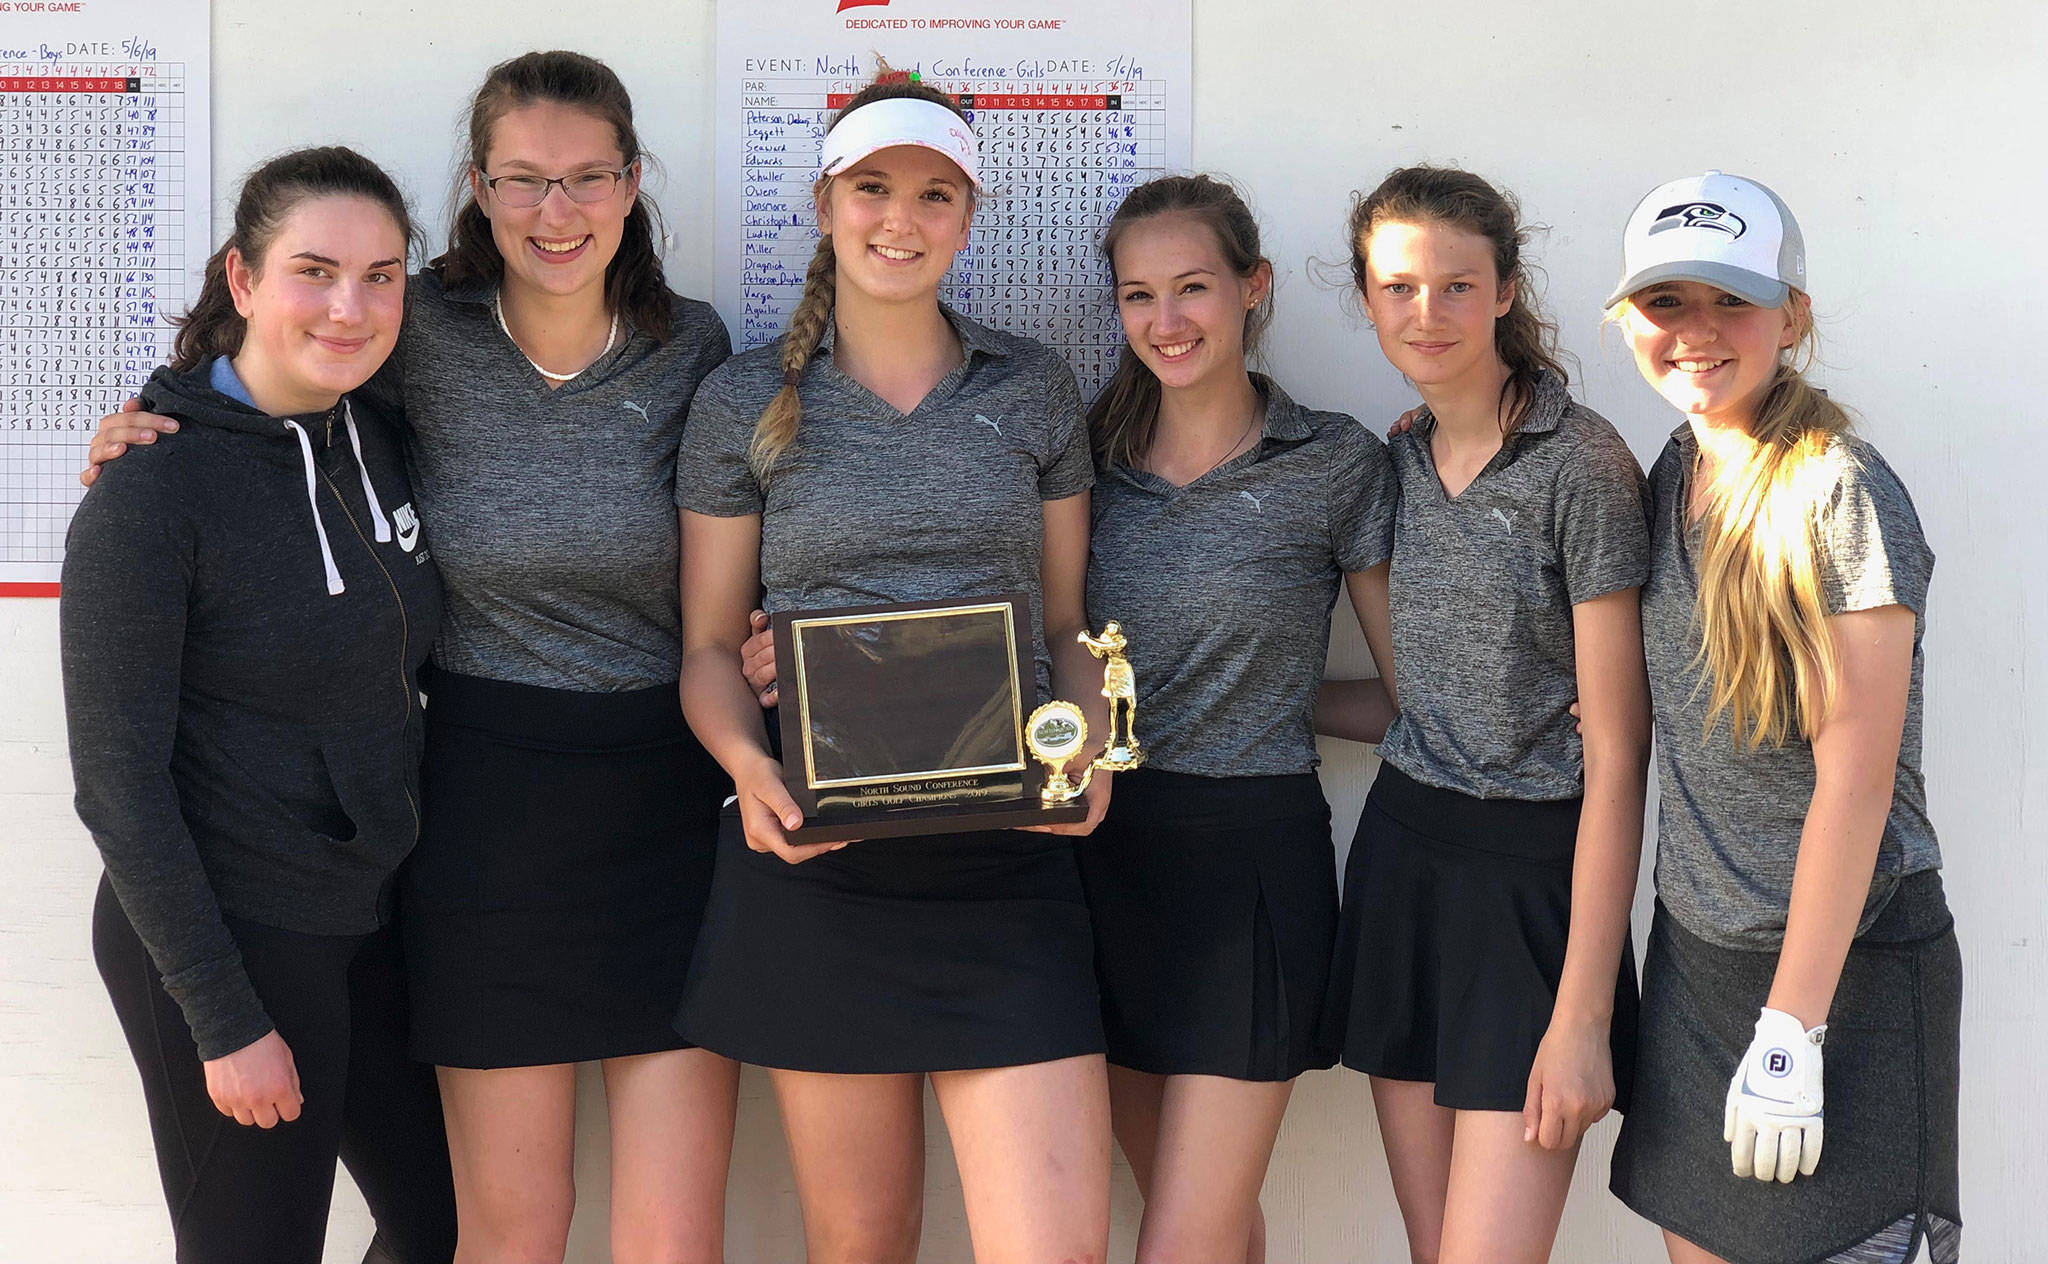 The South Whidbey girls golf team — Olivia Varga, left, Tori Schuller, Emma Leggett, Alyssa Ludtke, Bella Pierce and Caitlin Sullivan — show off their North Sound Conference championship trophy. (Submitted photo)